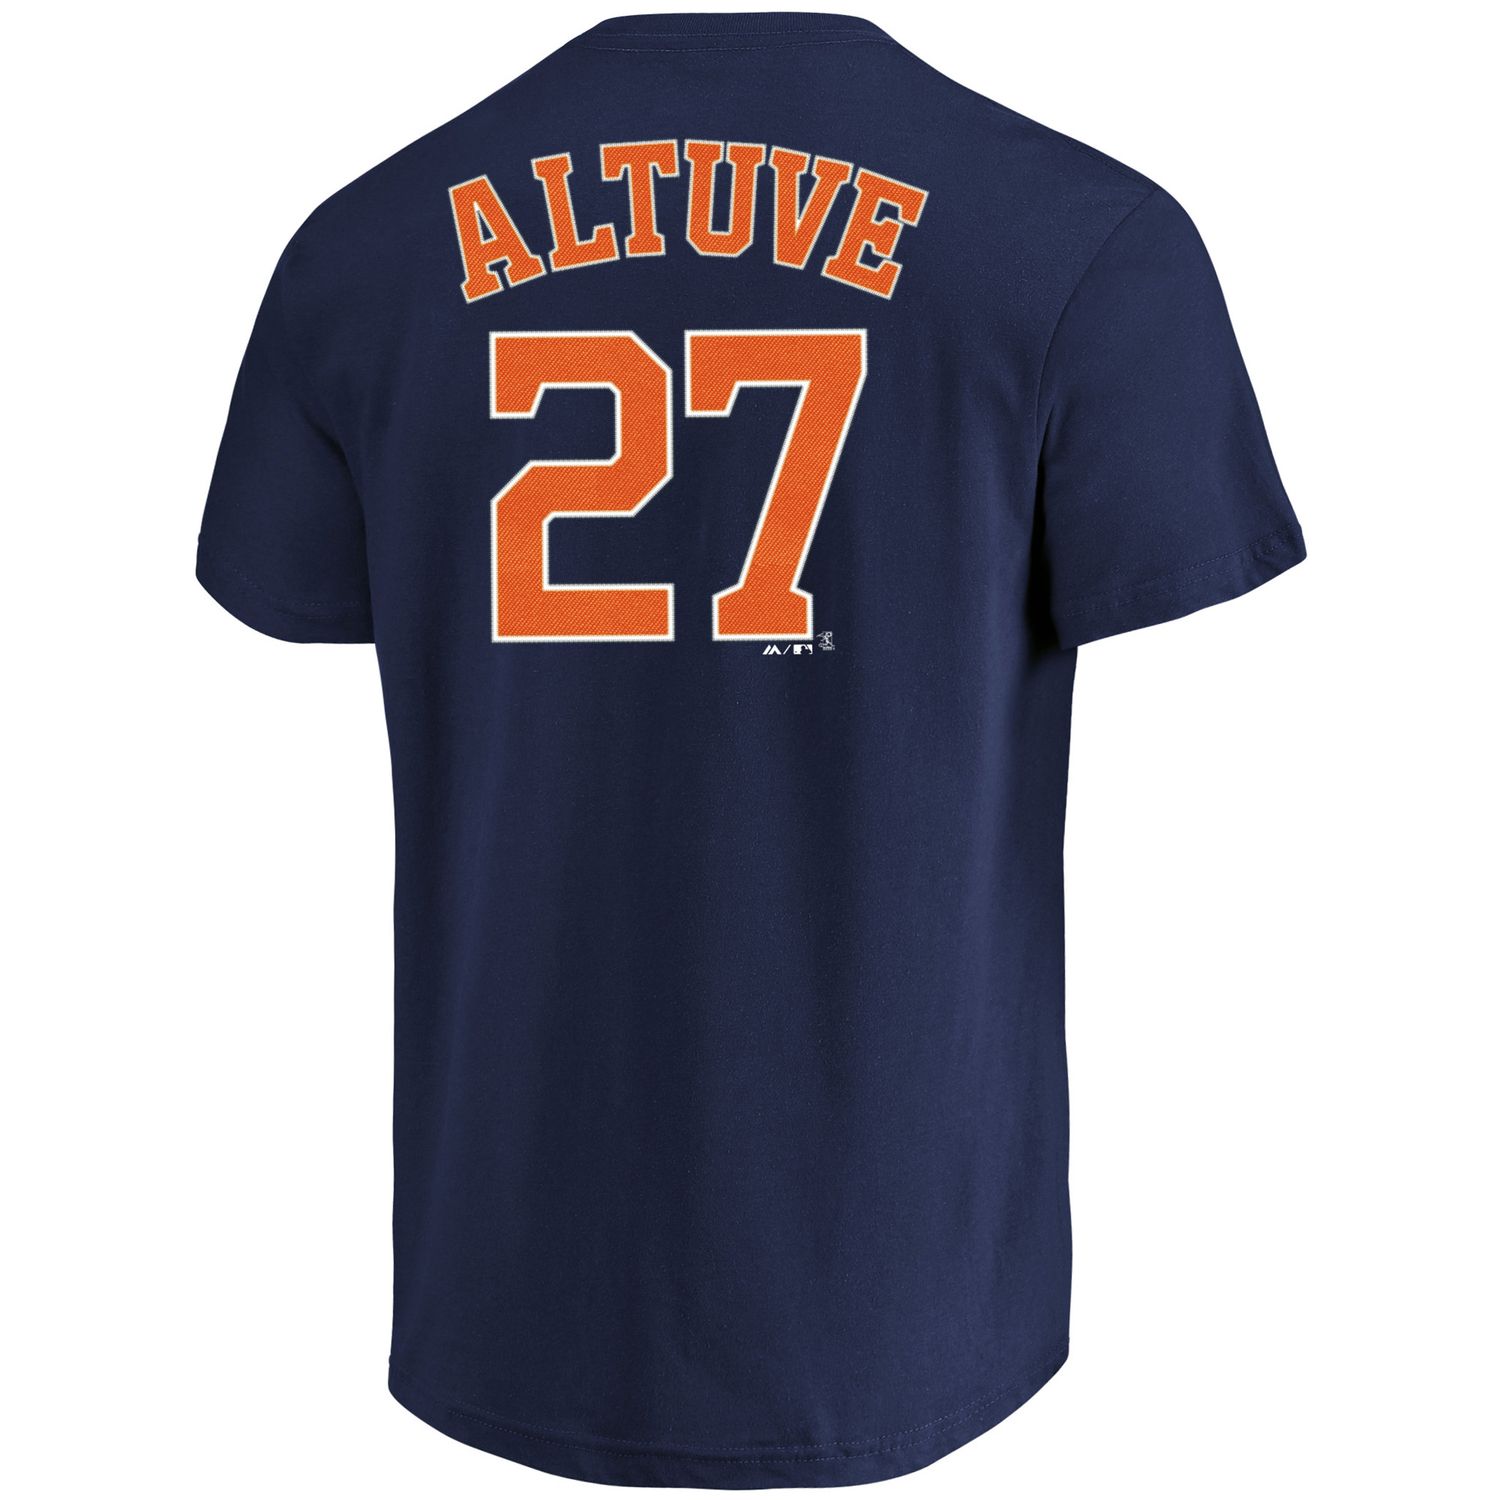 big and tall astros jersey